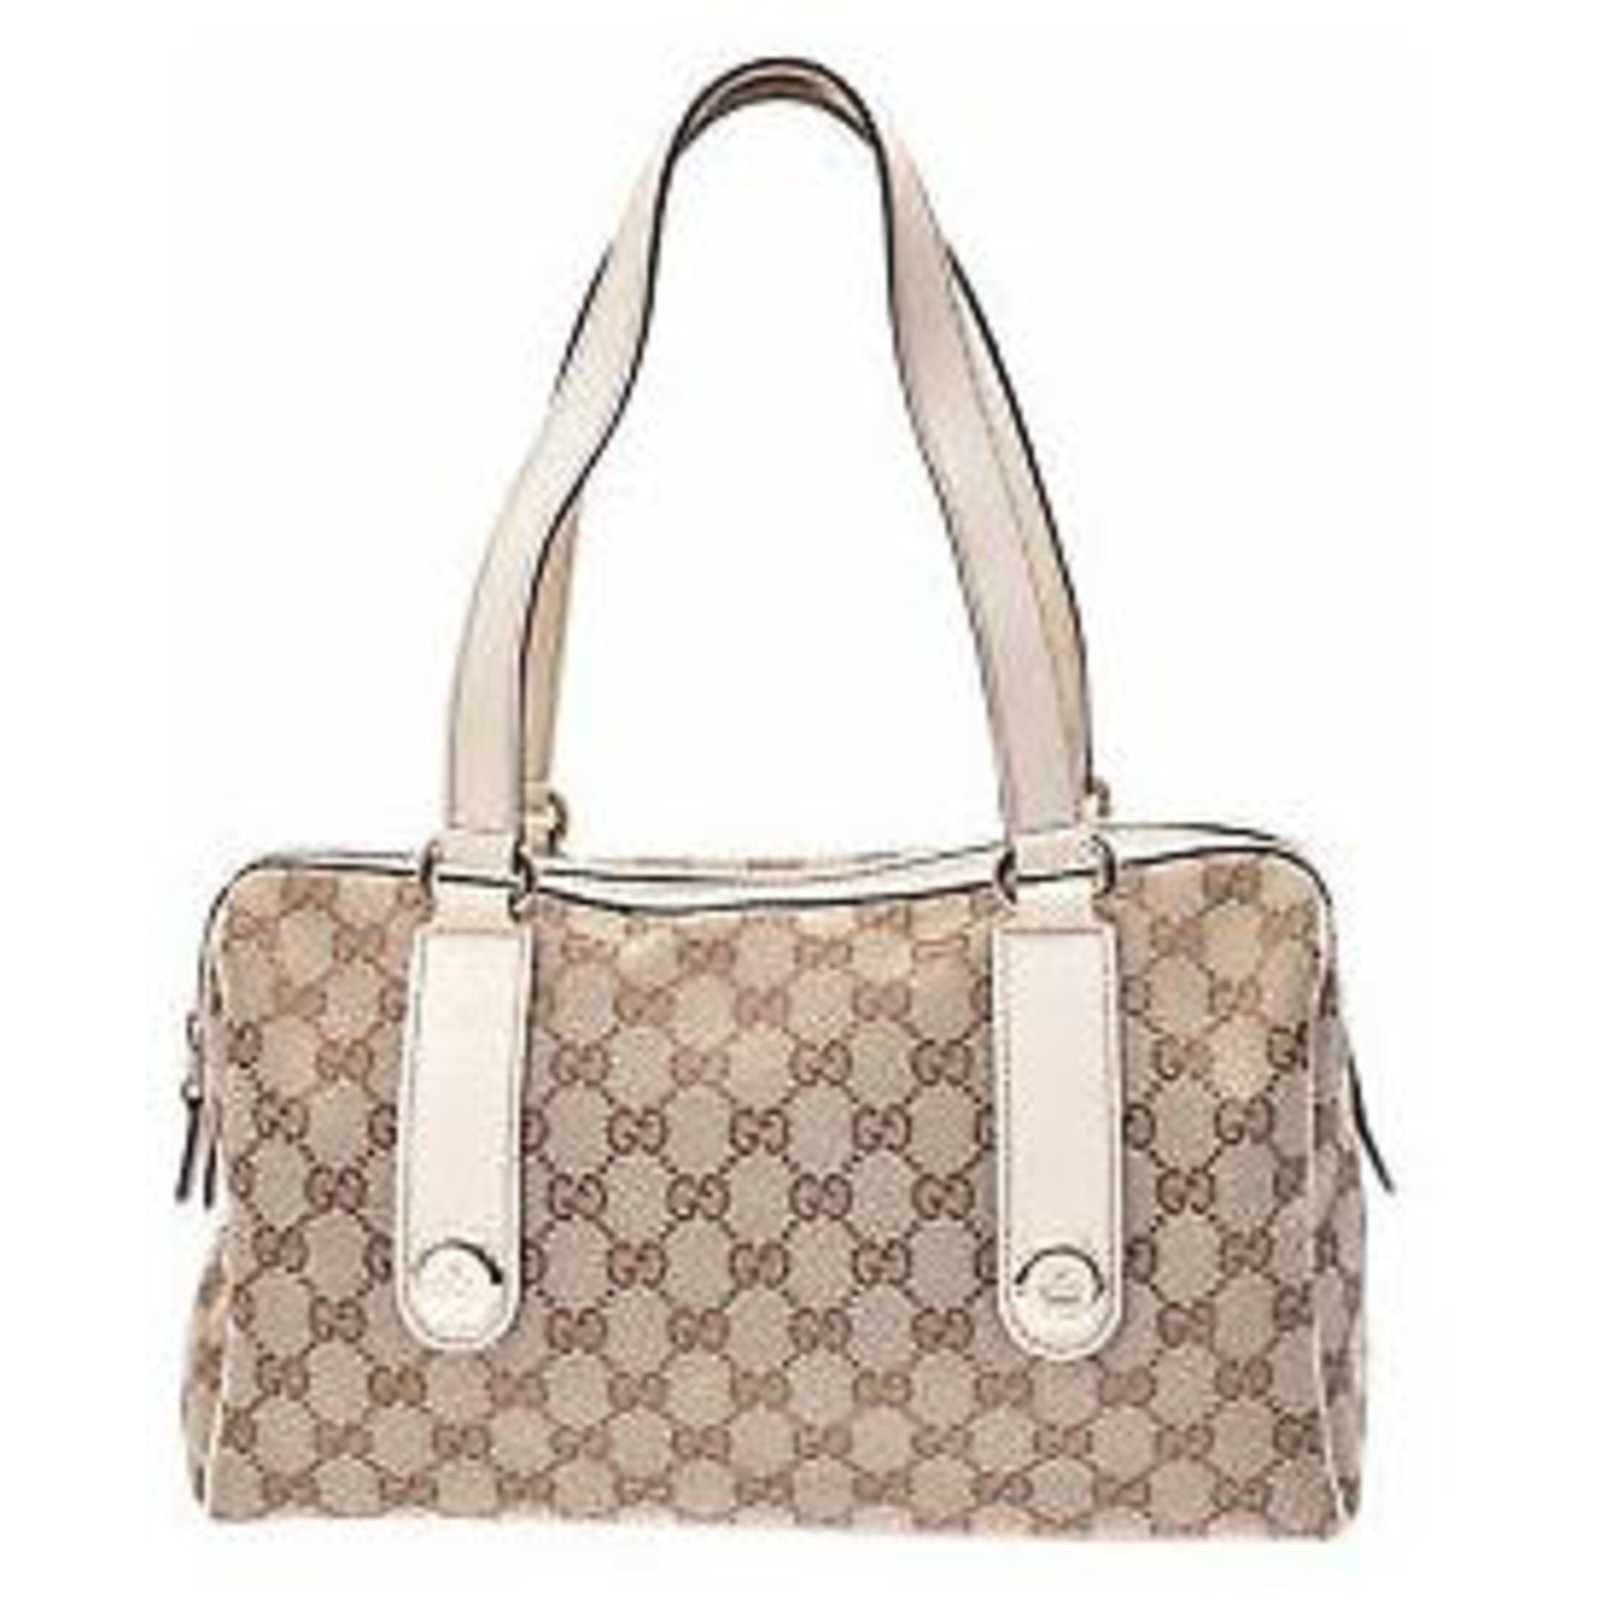 Europe Gucci Bag Price List Reference Guide - Spotted Fashion